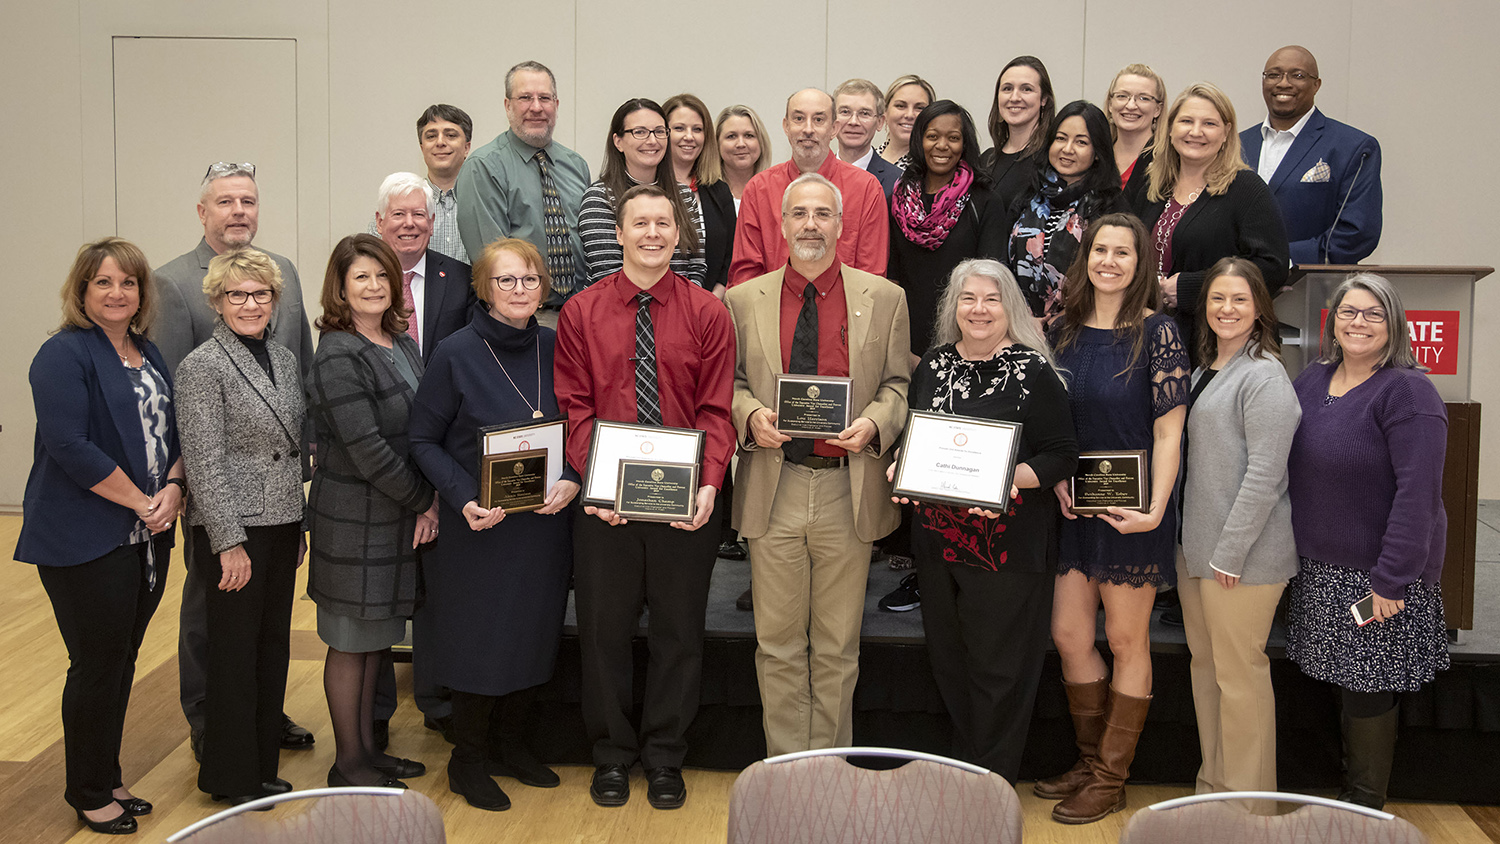 Provost Unit Awards for Excellence winners